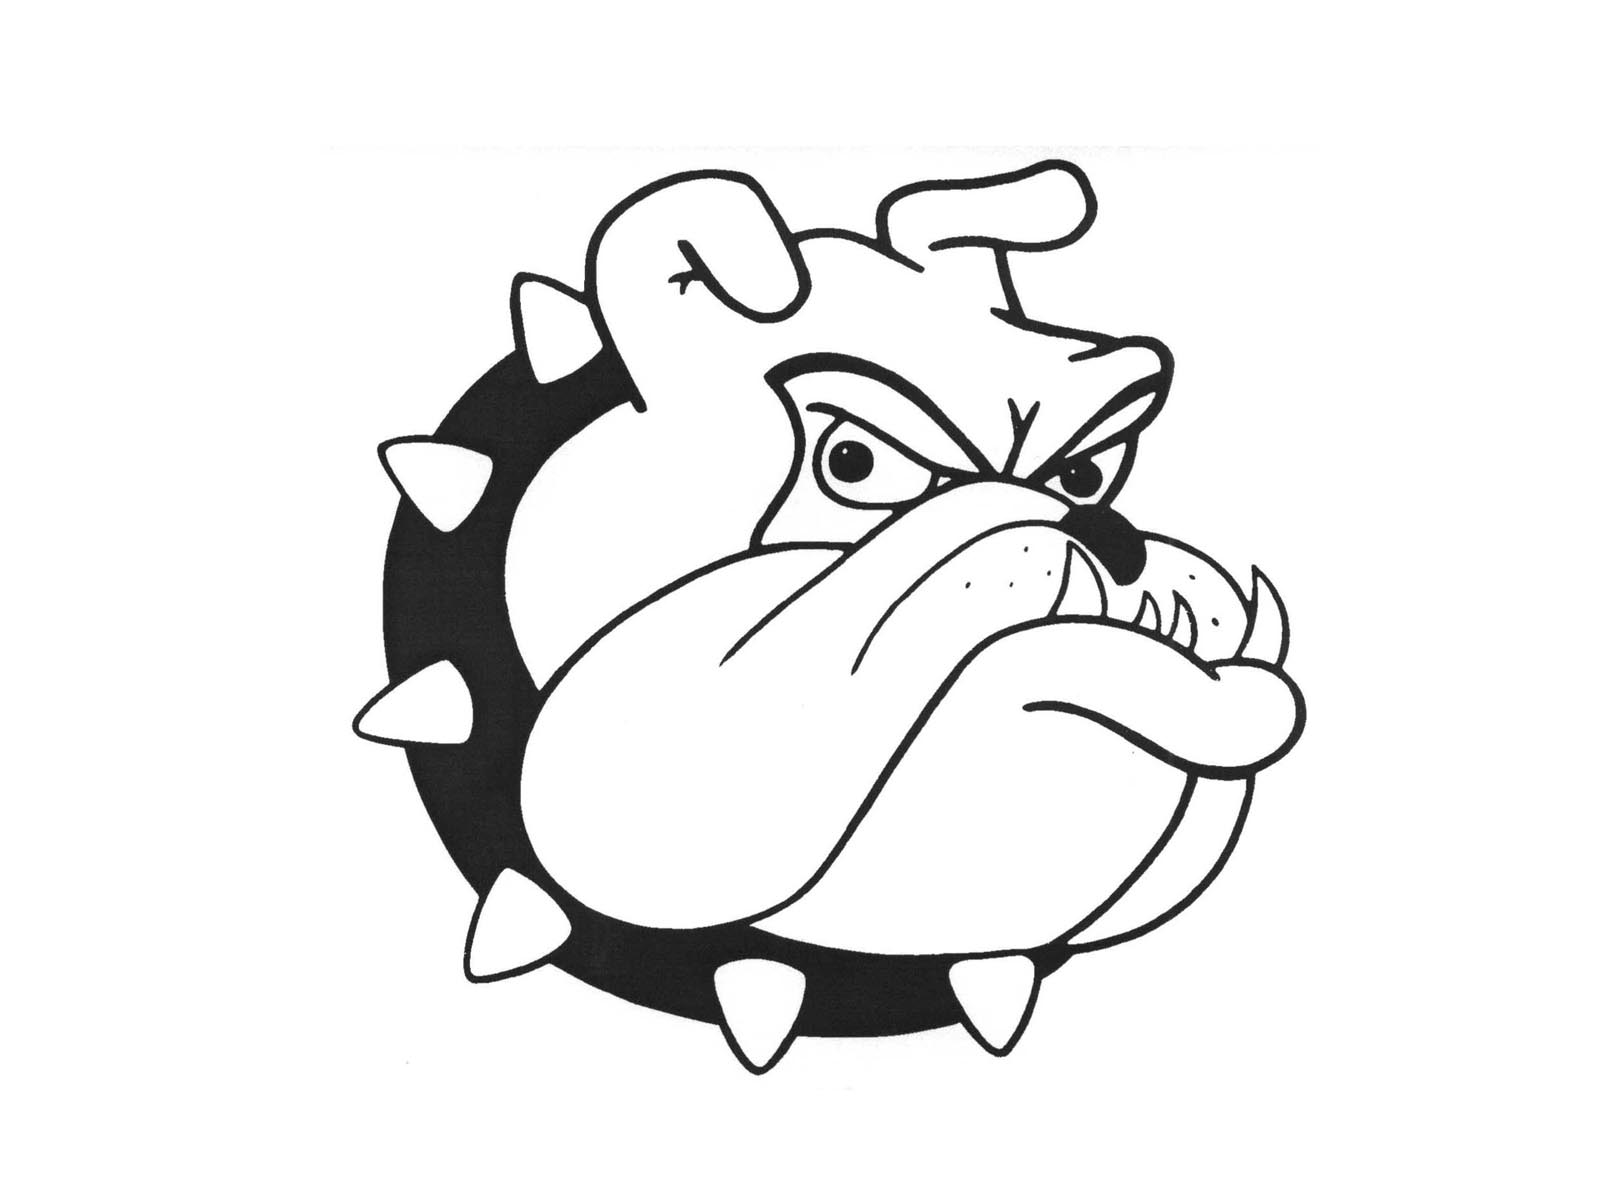 14 Cartoon Bulldog Images Free Cliparts That You Can Download To You